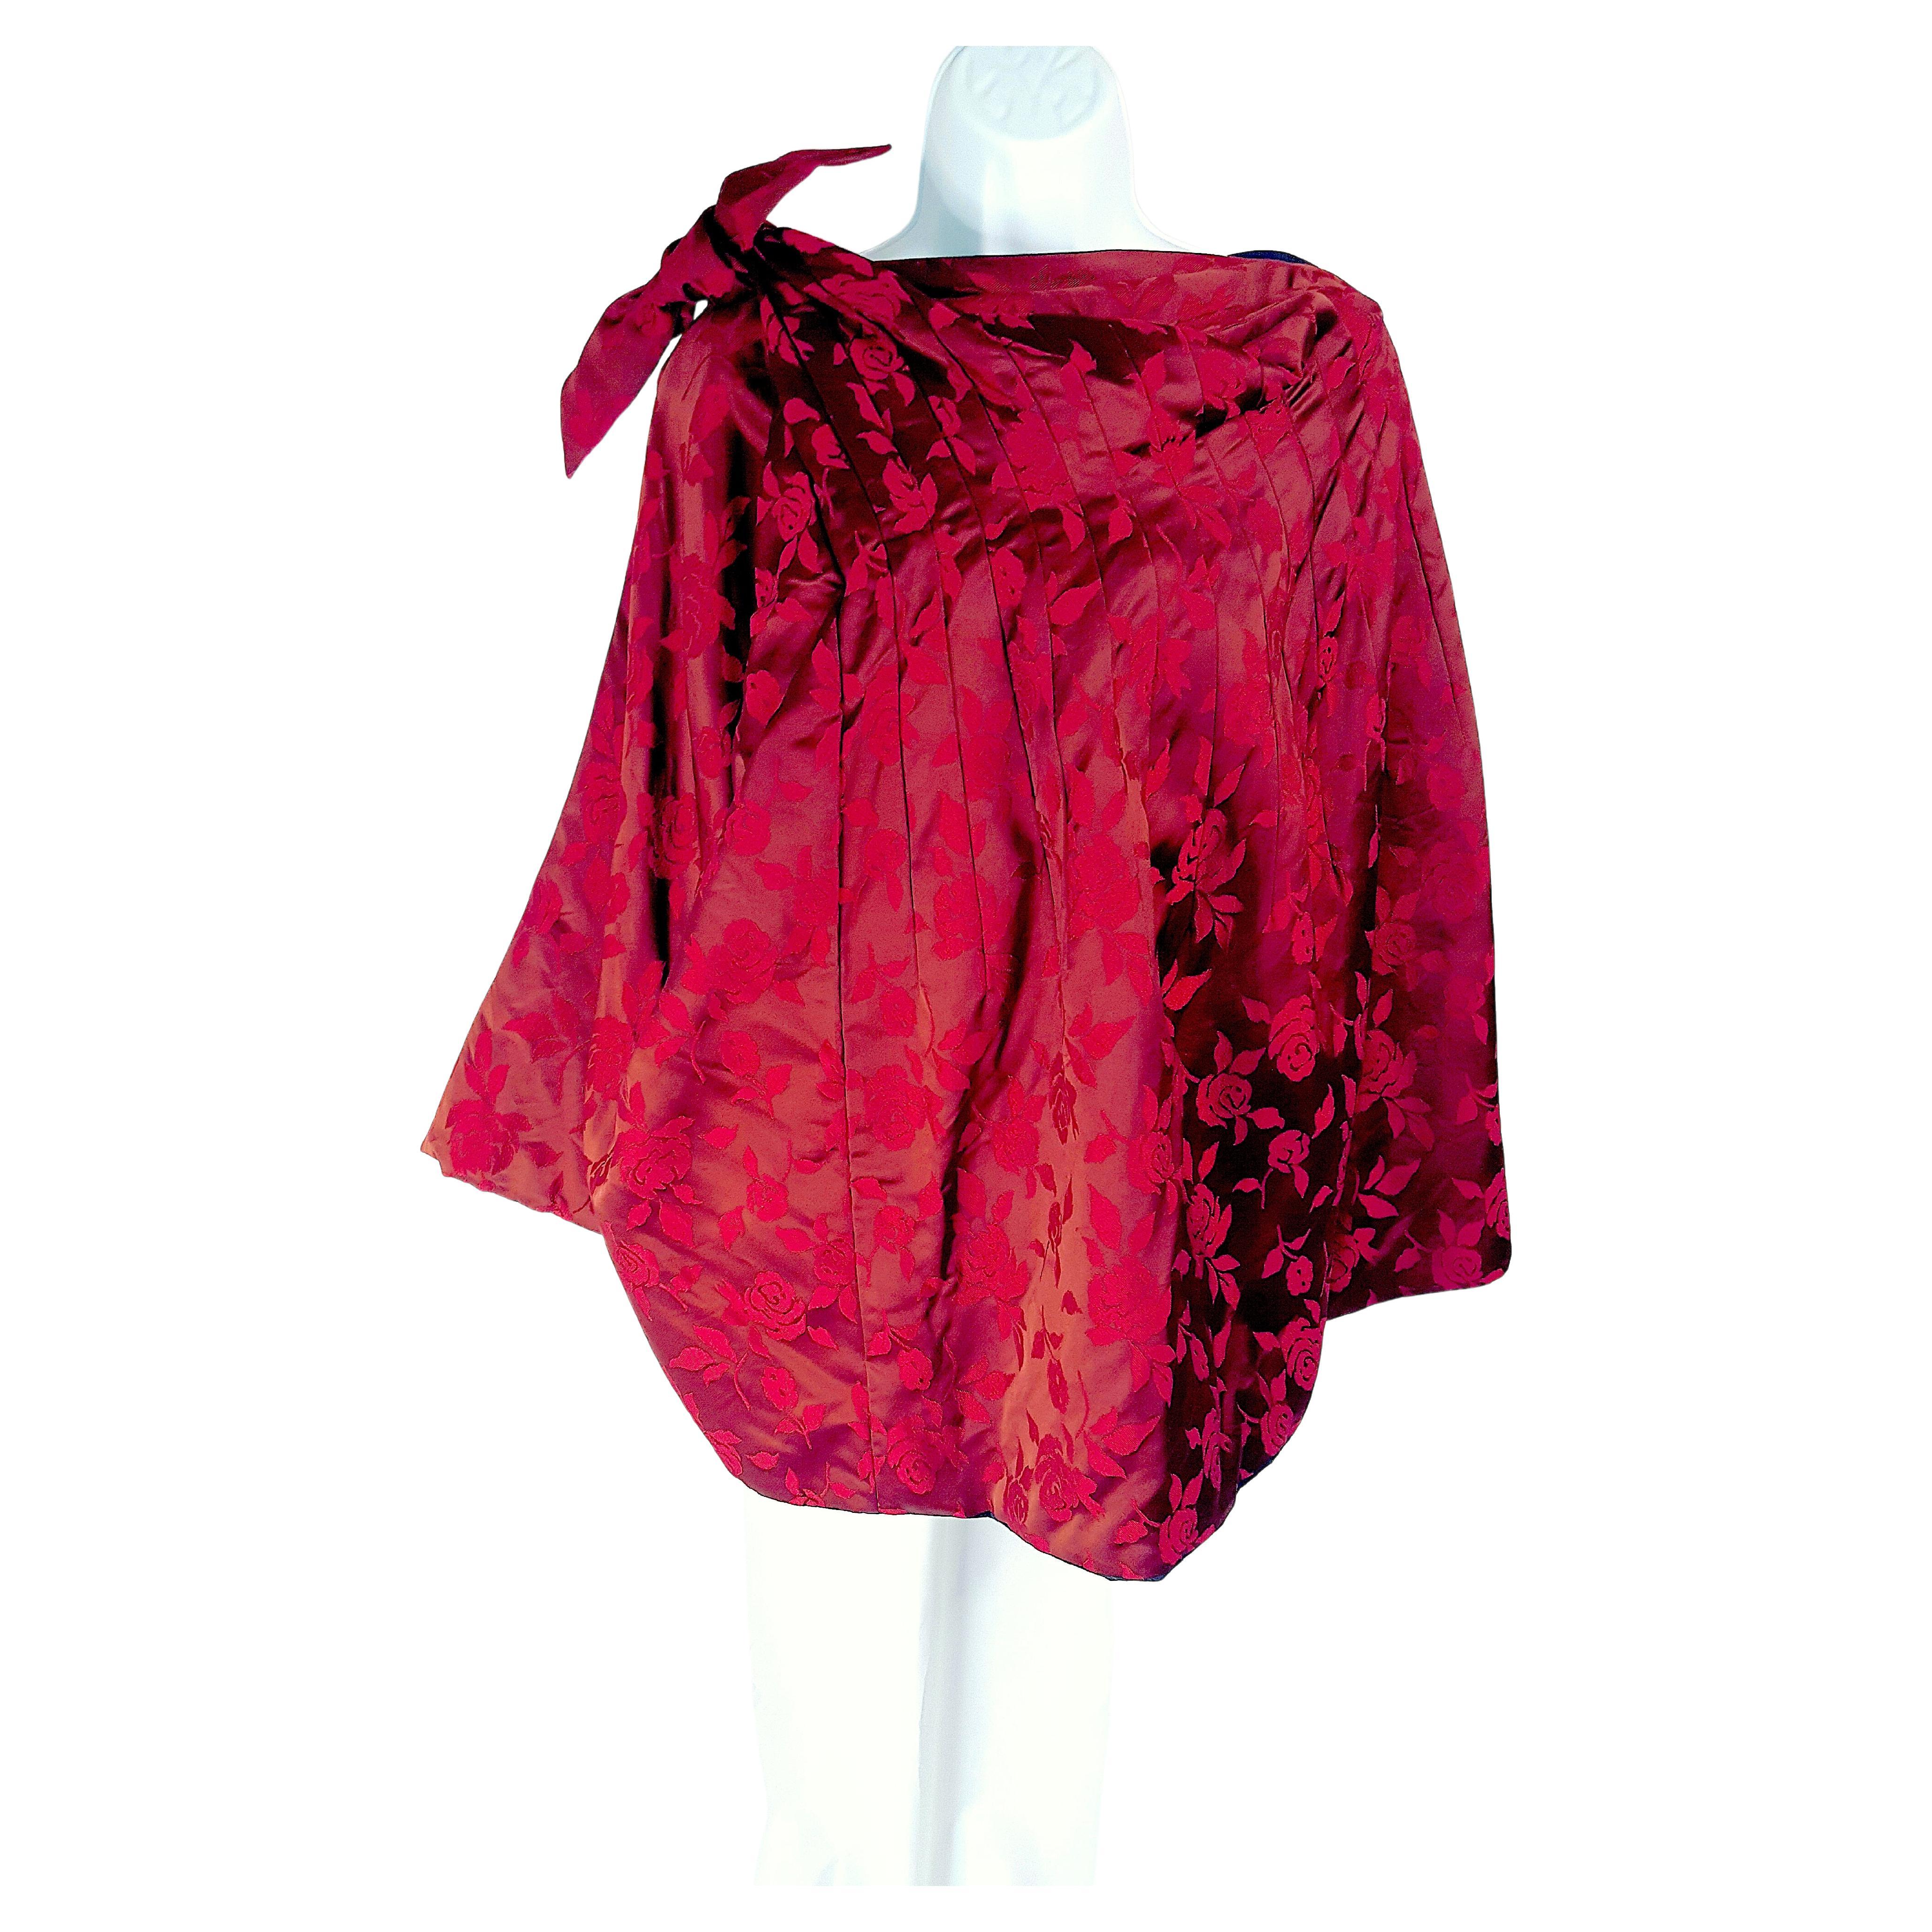 CommeDesGarcons 1996 Convertible Padded RedRoseJacquard & NavyCotton Skirt Cape For Sale